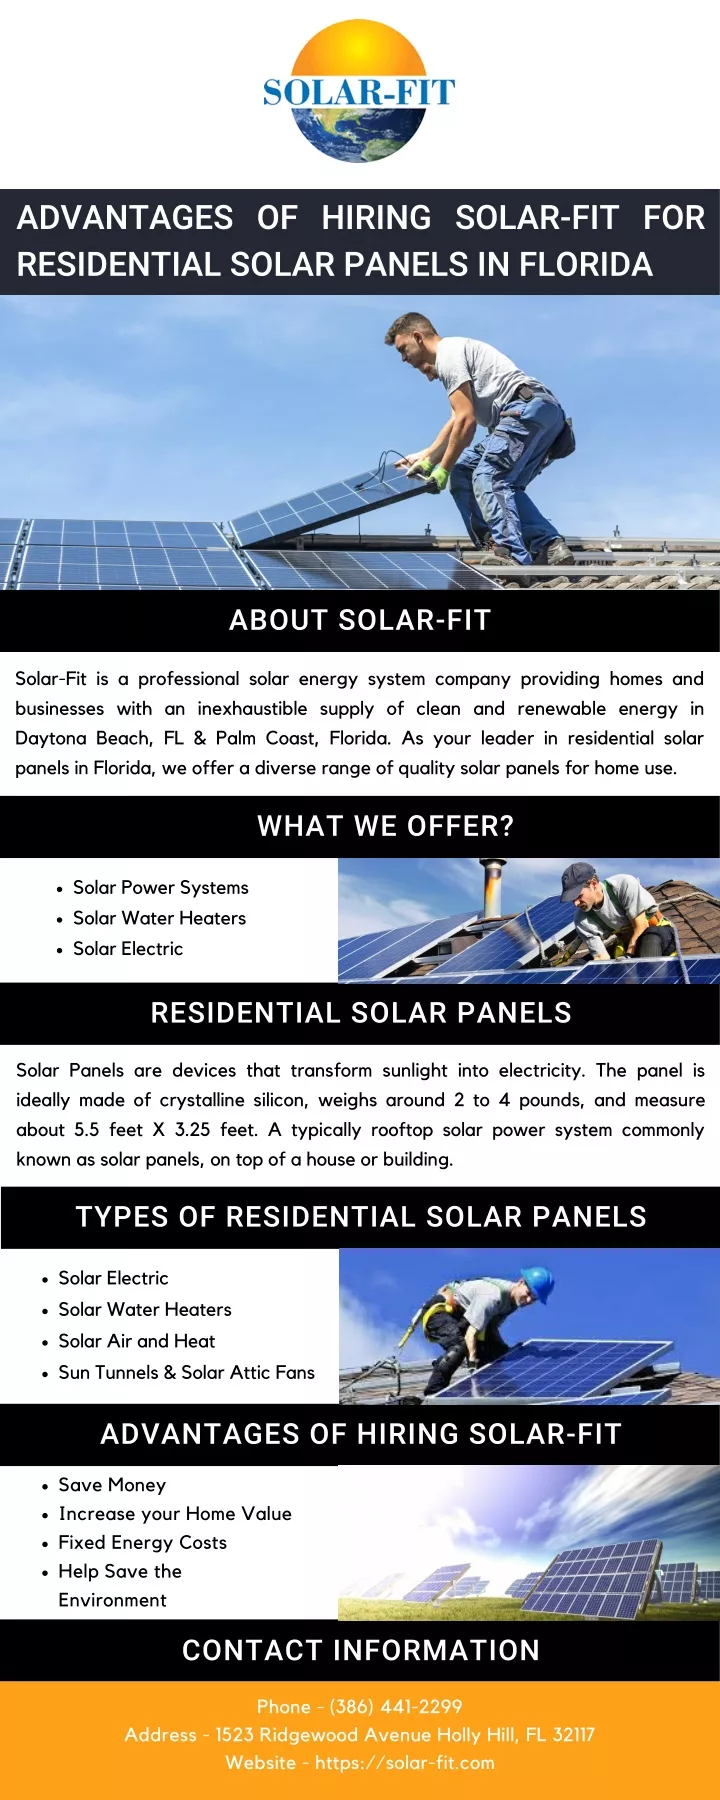 advantages of hiring solar fit for residential